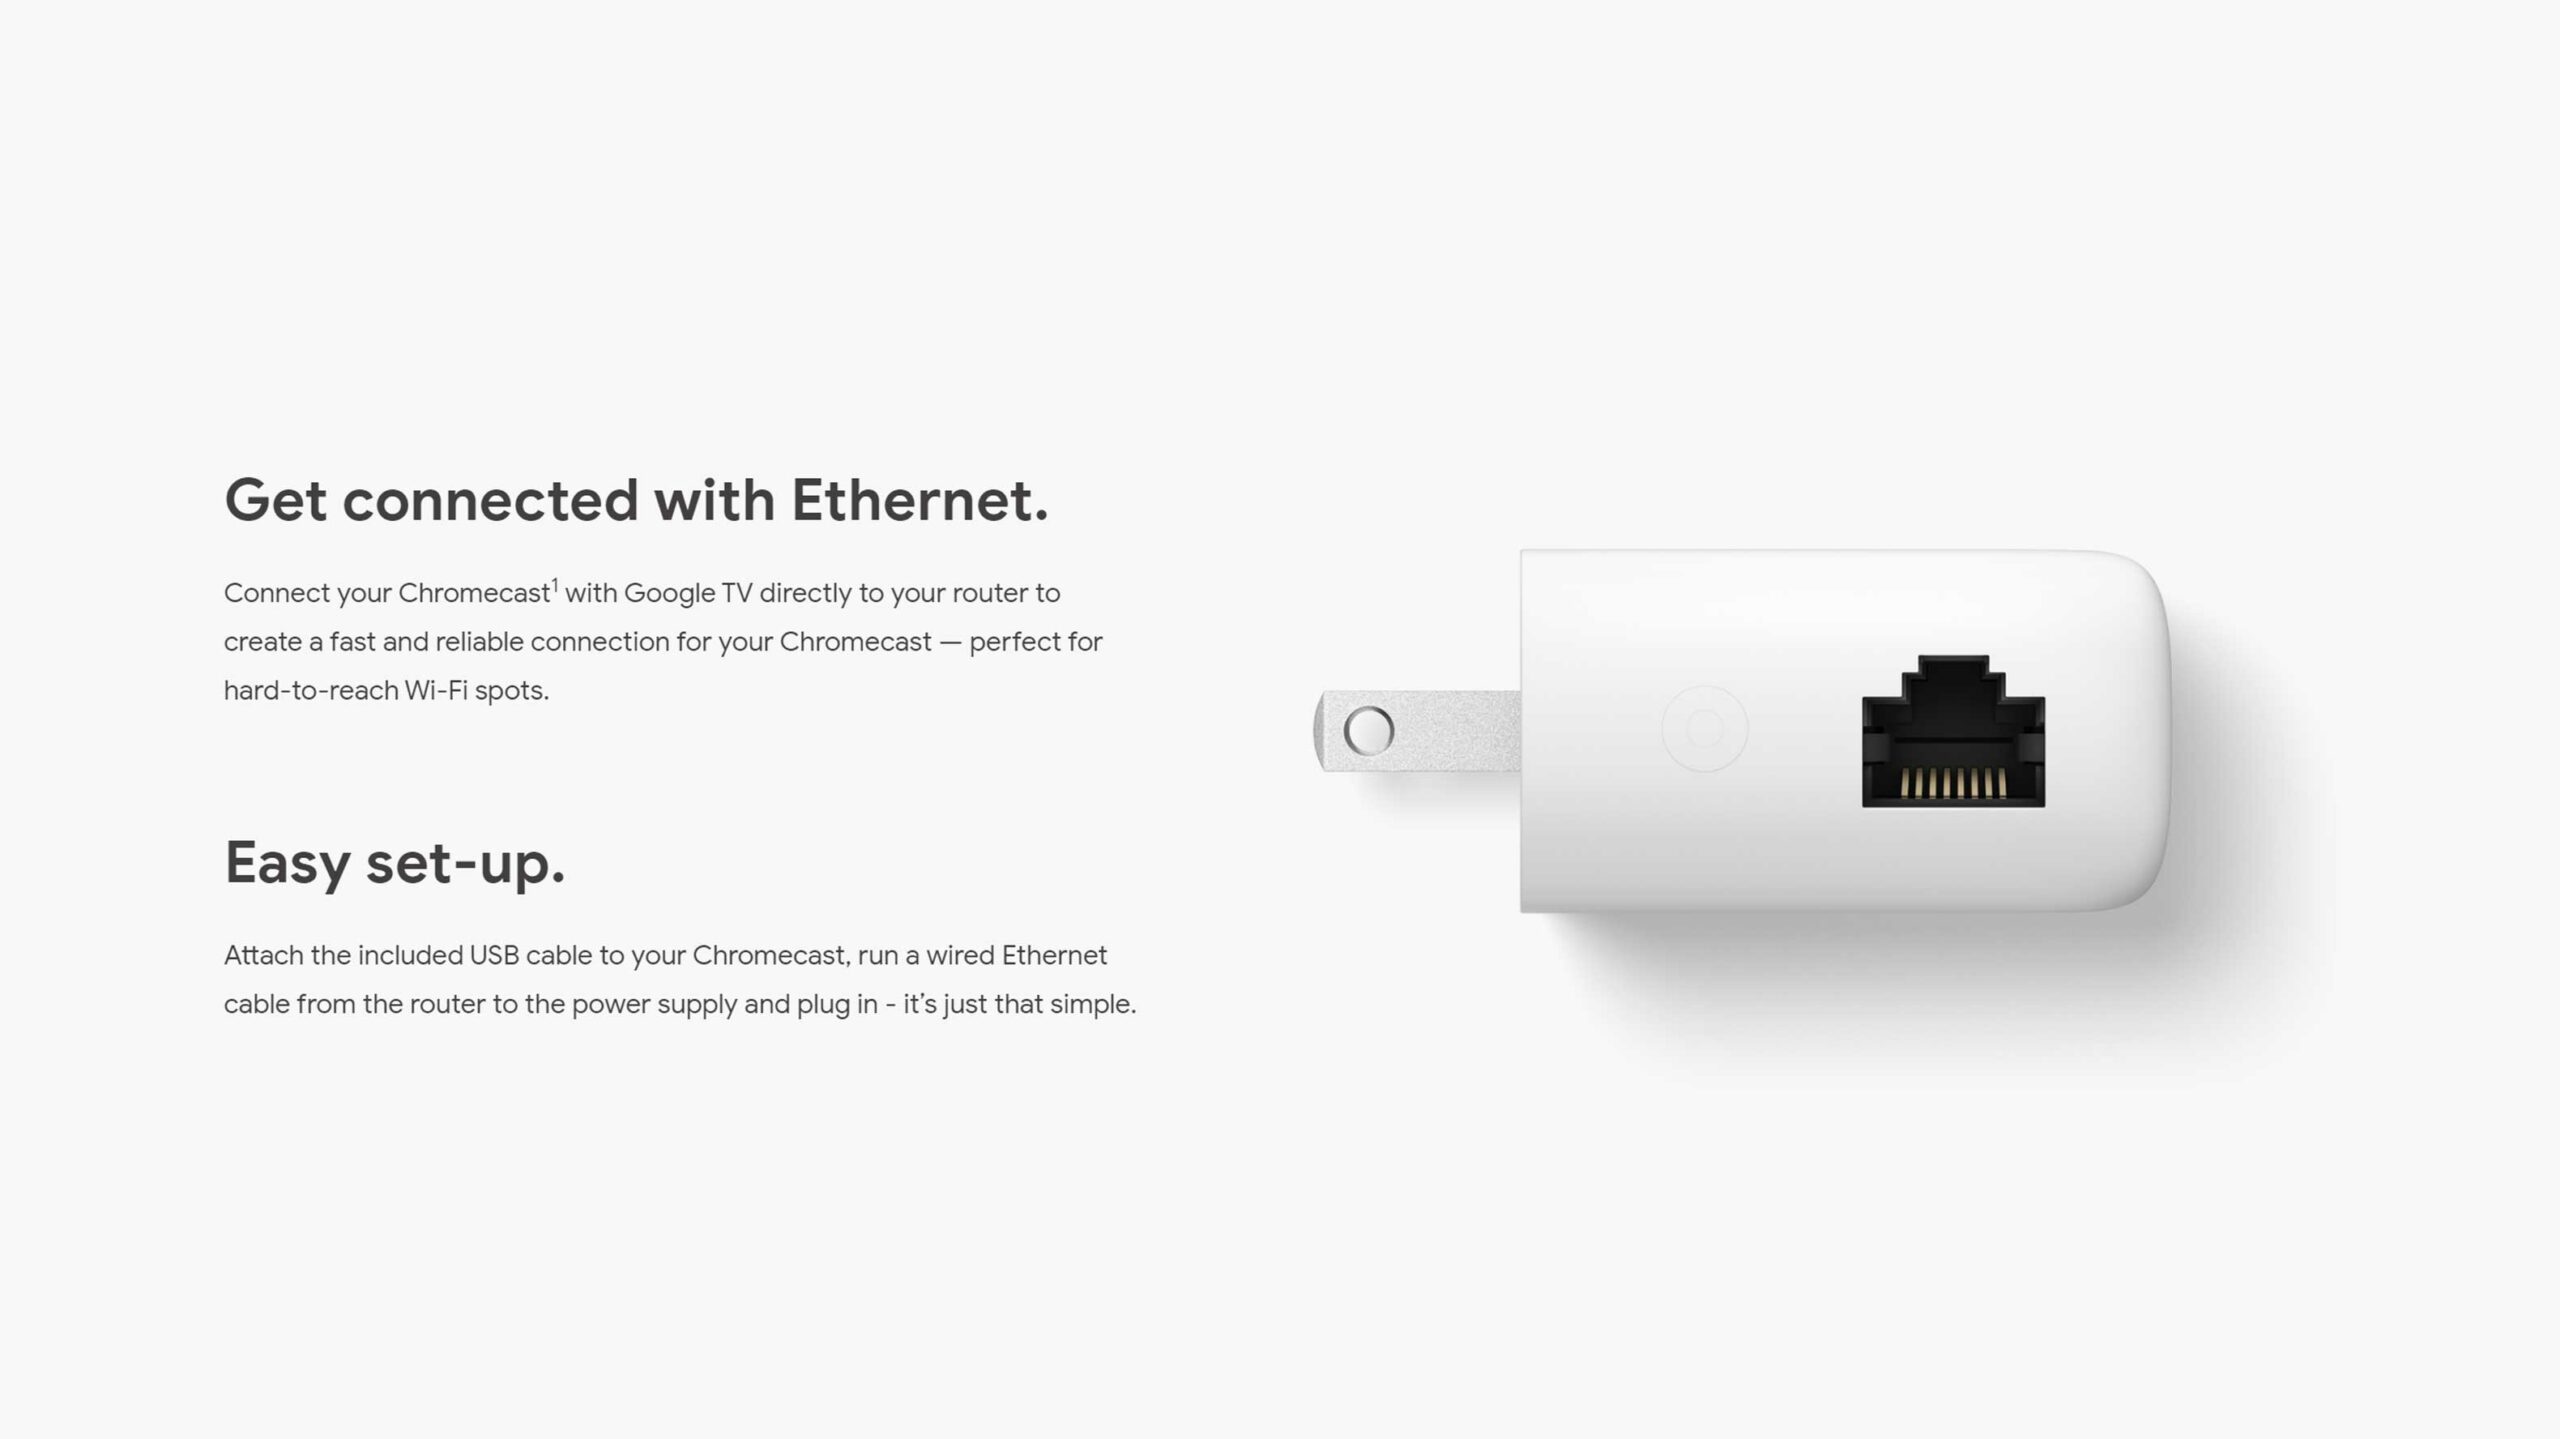 Google quietly released an Ethernet adapter new Chromecast